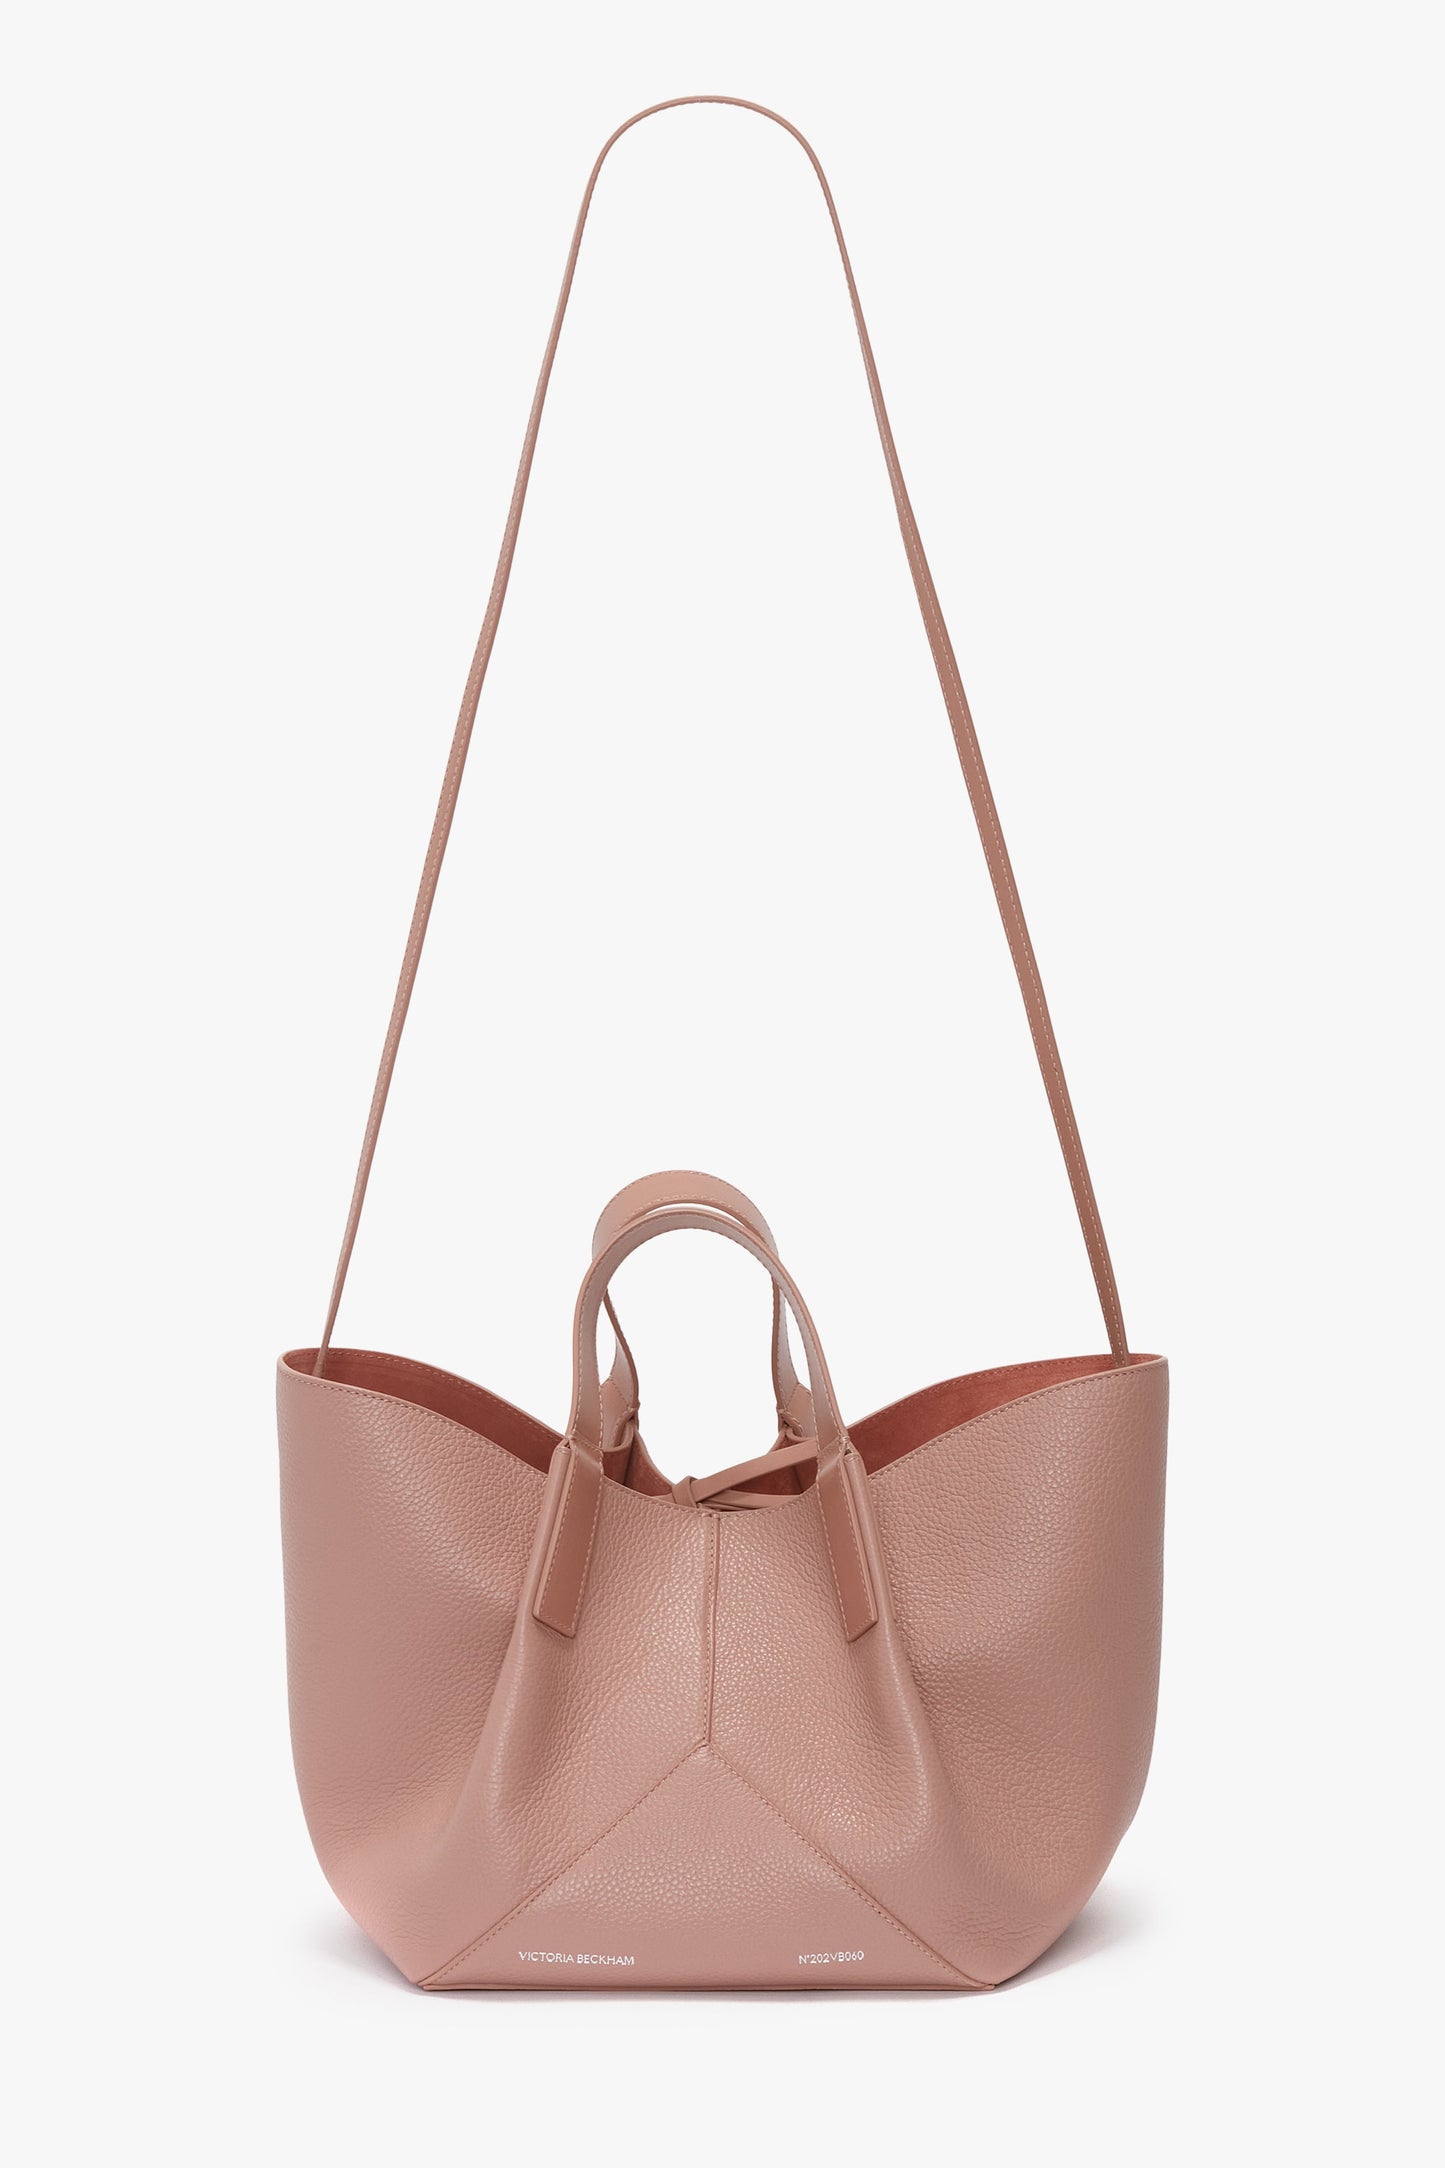 The W11 Mini Tote Bag In Marshmallow Leather by Victoria Beckham, crafted from light pink textured calf leather, features two short handles and a long shoulder strap, perfect as a crossbody bag. Displayed against a plain white background, this stylish accessory is versatile and chic.